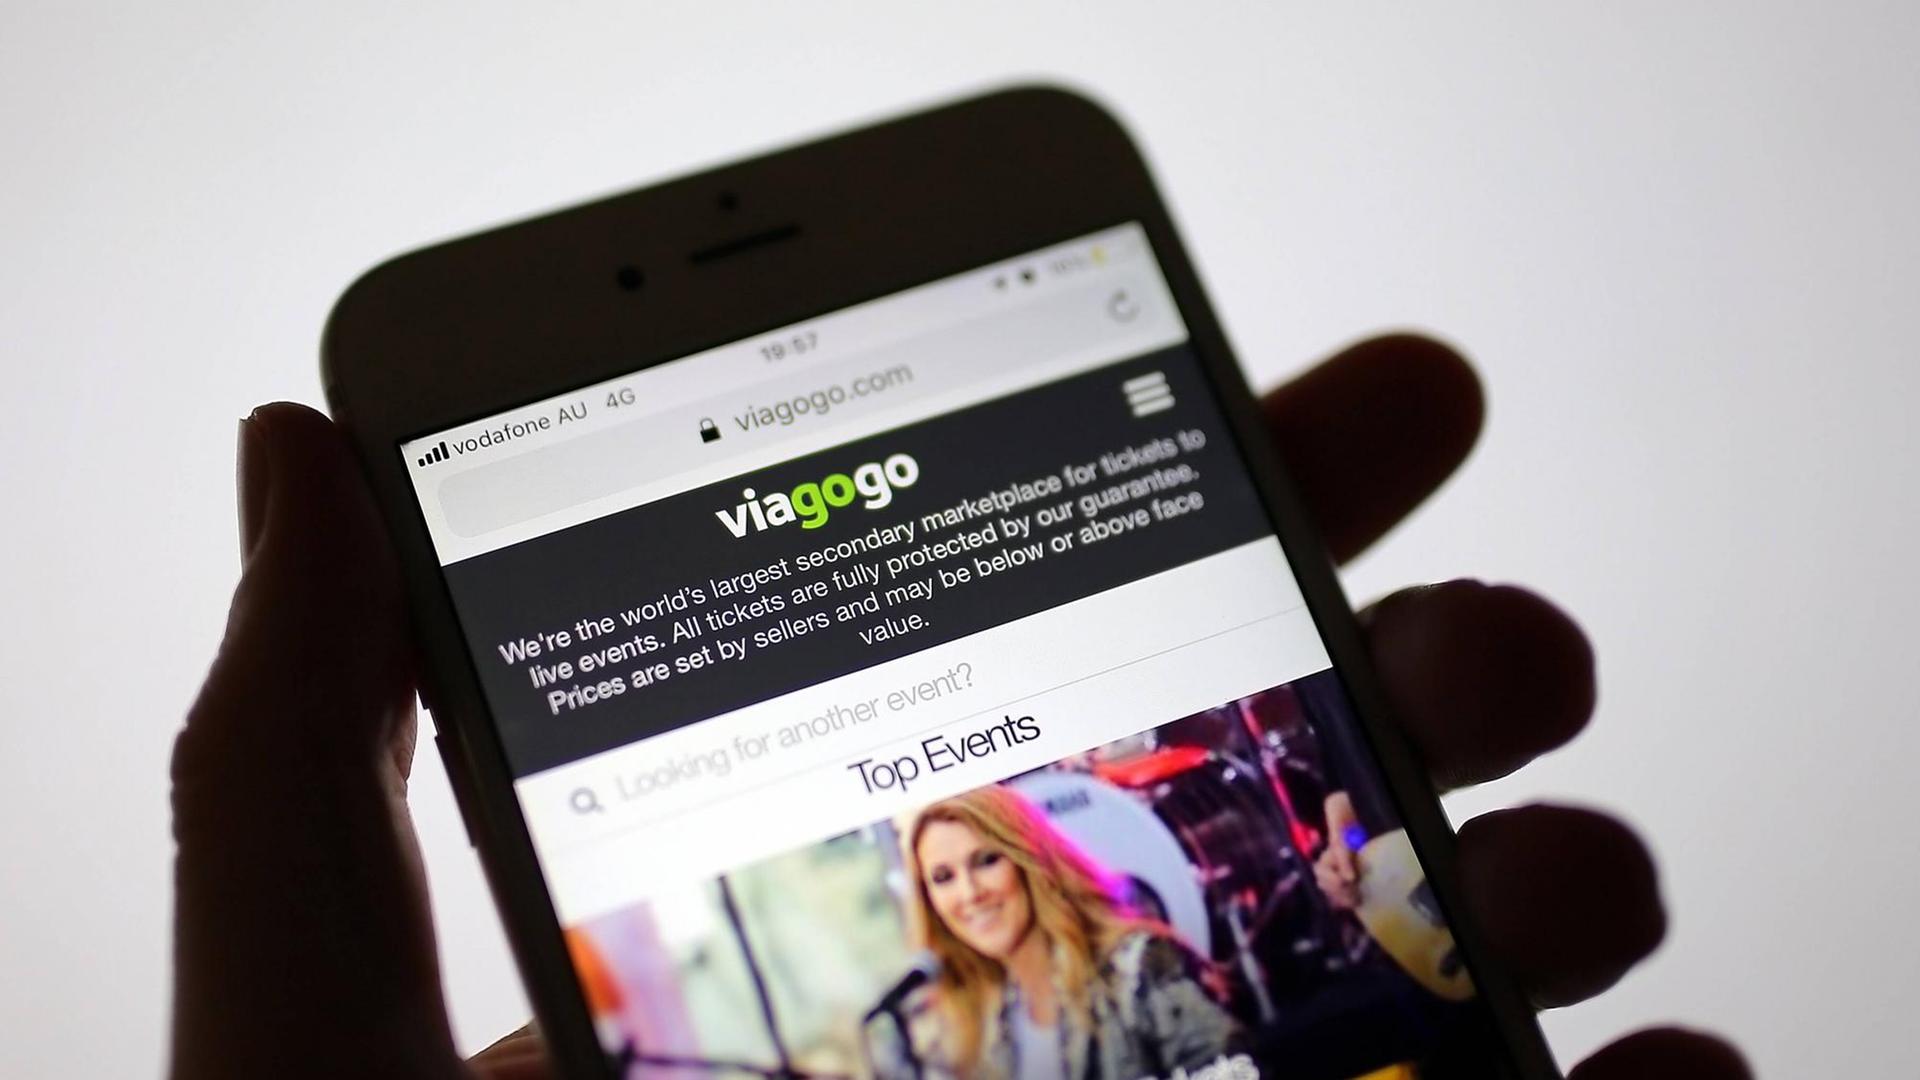 VIAGOGO STOCK, Viagogo s website is seen on a mobile phone in Sydney, Thursday, April 18, 2019. The Swiss-based ticket marketplace was found by a judge on Thursday to have broken several consumer laws when falsely claiming tickets were about to sell out and masquerading as an official ticket seller. ( !ACHTUNG: NUR REDAKTIONELLE NUTZUNG, KEINE ARCHIVIERUNG UND KEINE BUCHNUTZUNG! SYDNEY NSW AUSTRALIA PUBLICATIONxINxGERxSUIxAUTxONLY Copyright: xSTEVENxSAPHOREx 20190418001395694493